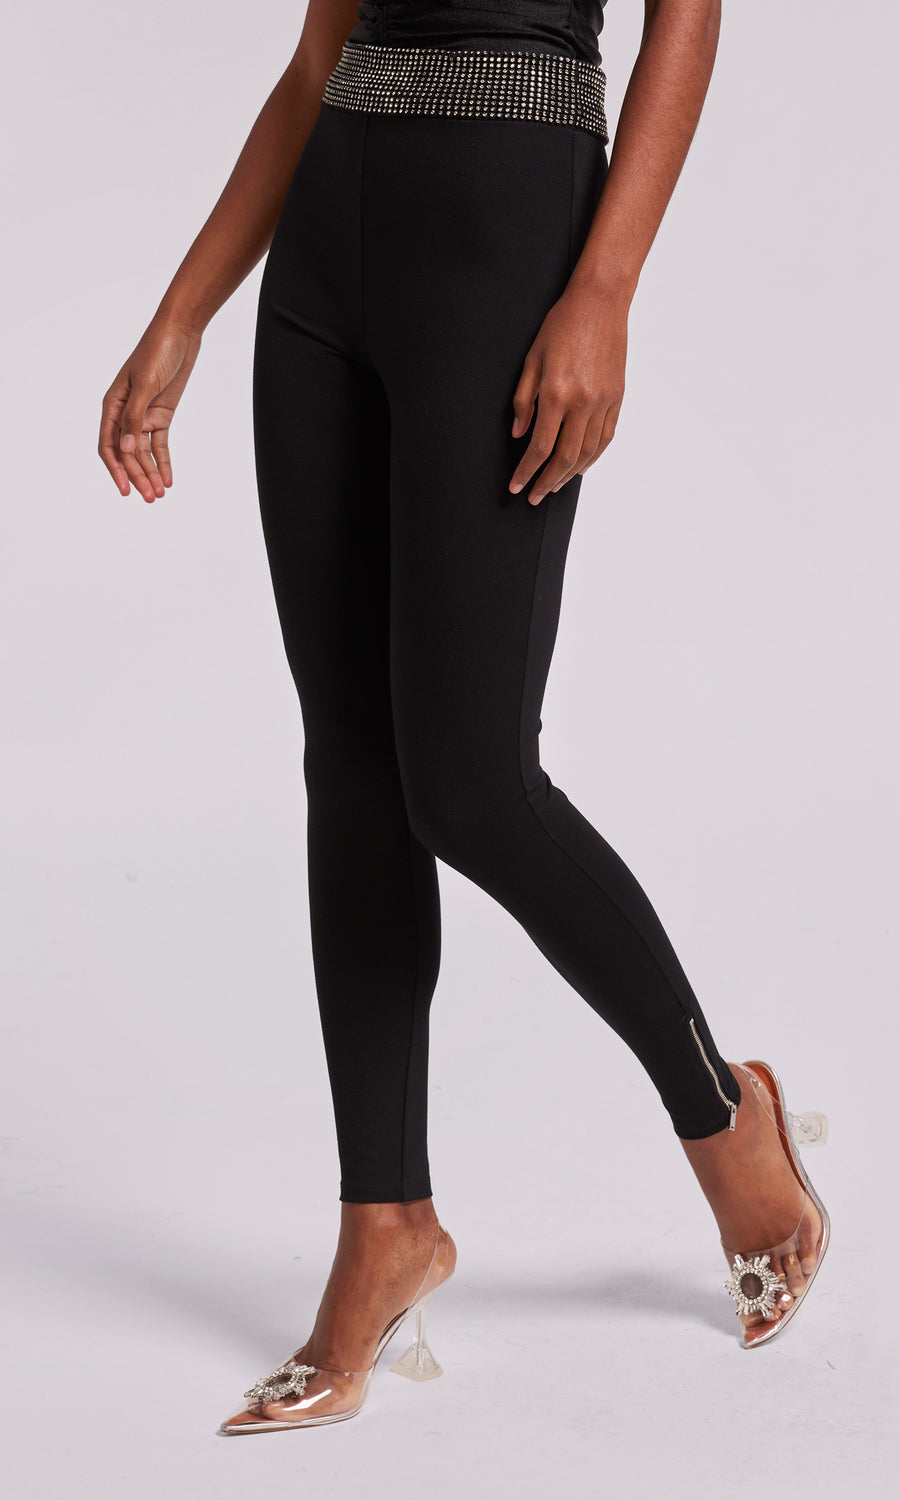 Women's River Island Leather & Faux Leather Pants & Leggings | Nordstrom